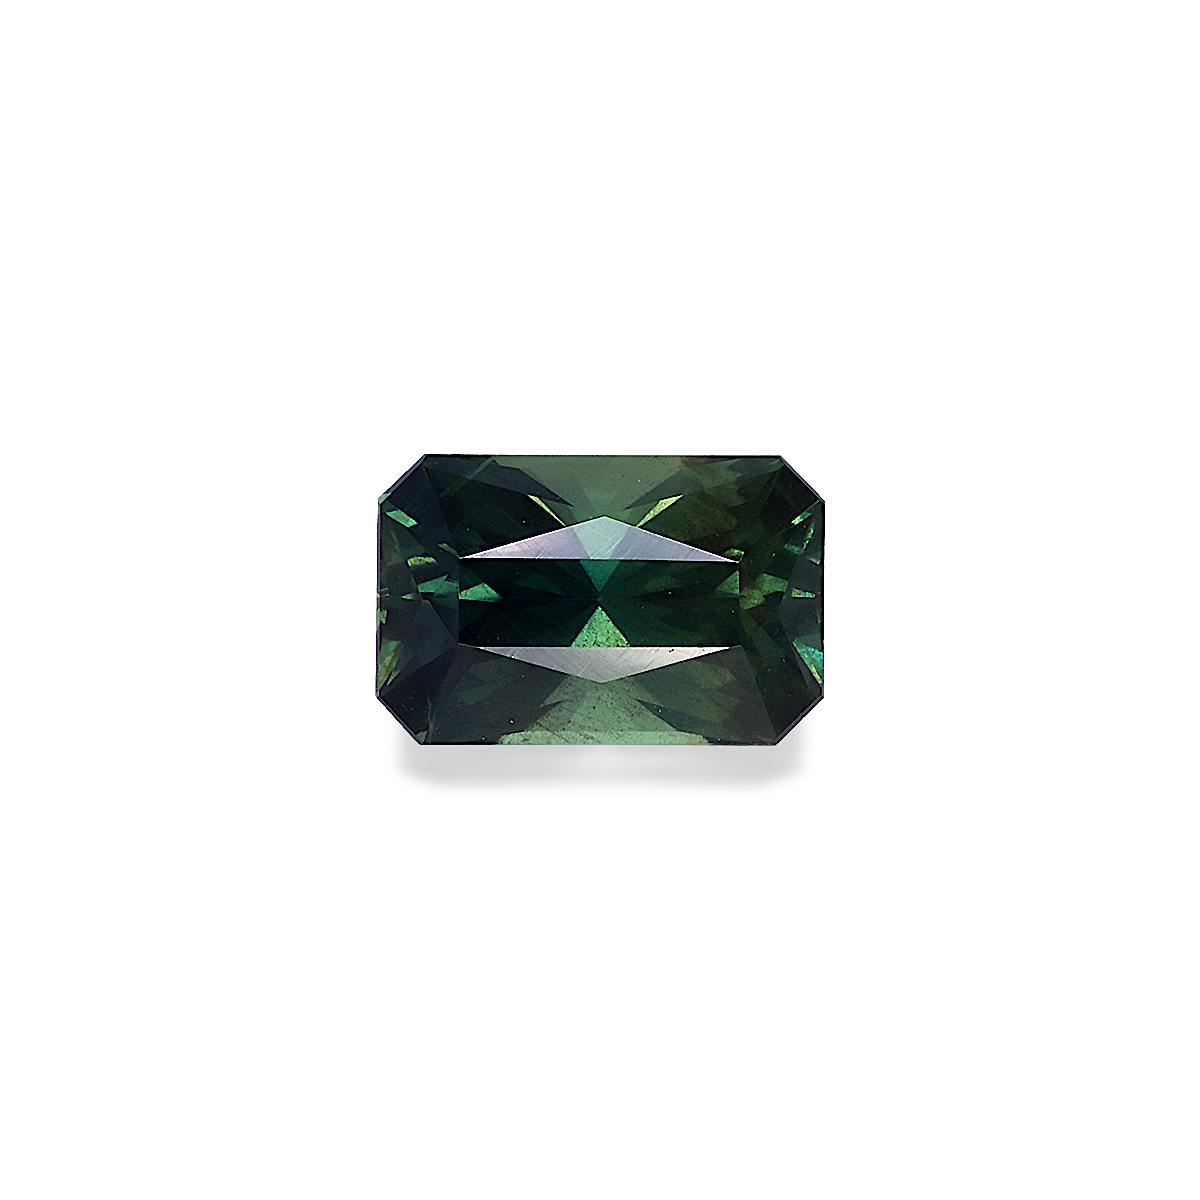 Green Teal Sapphire 1.57ct (TL0051)